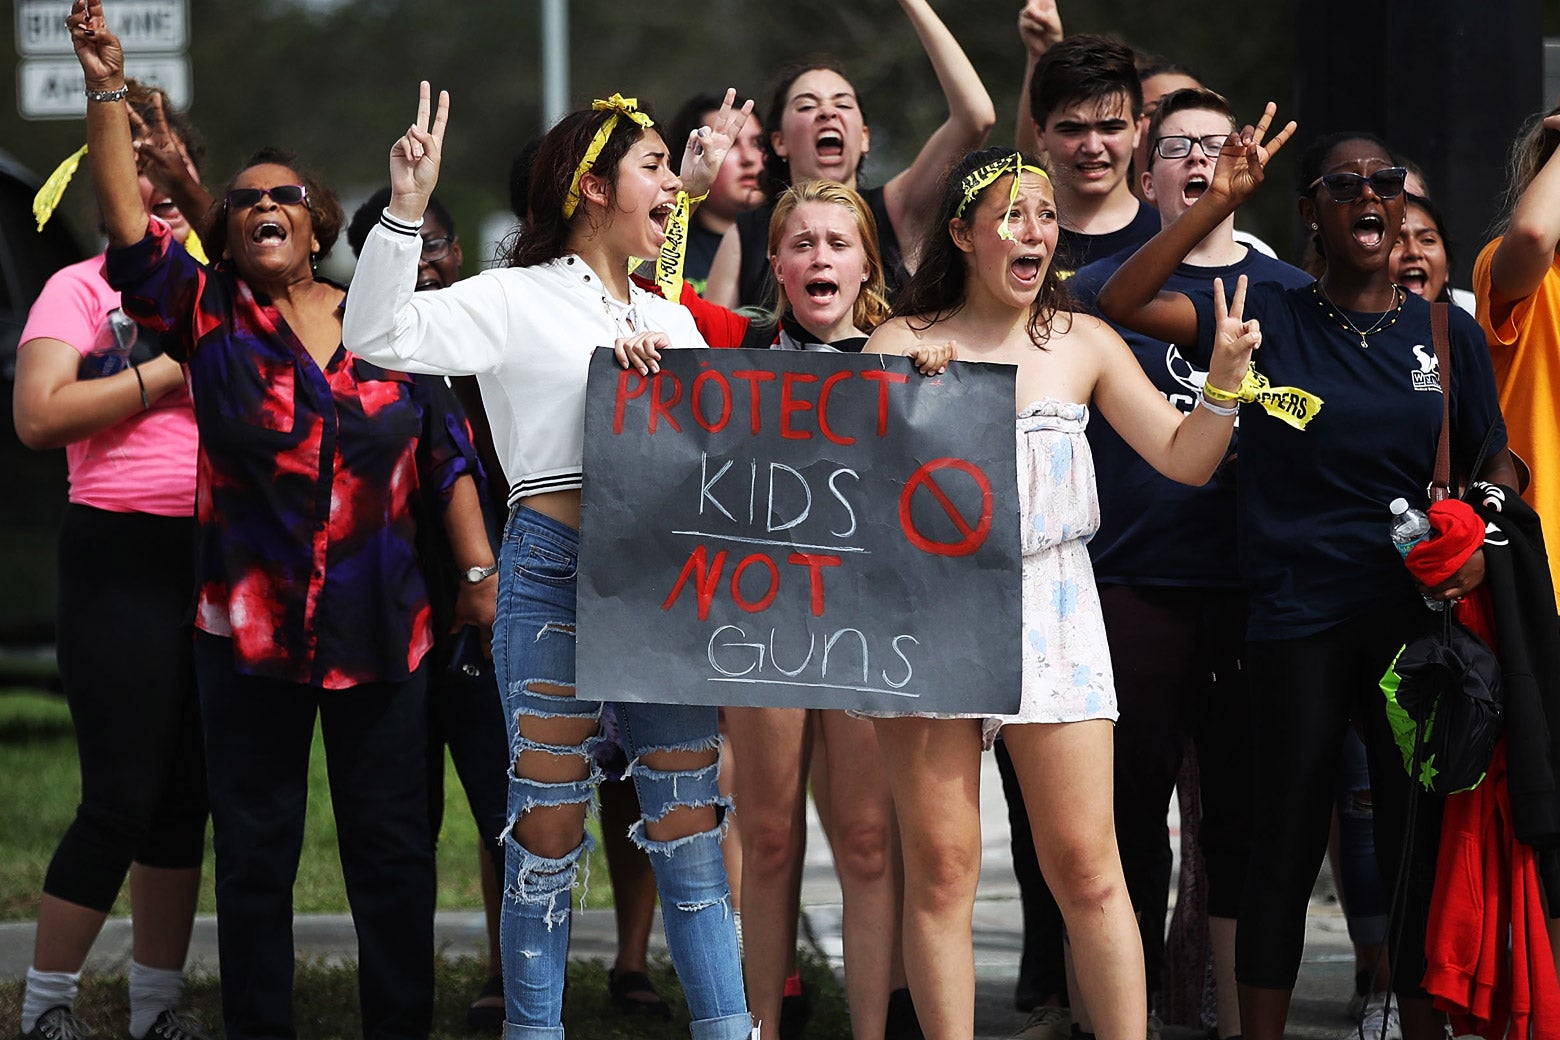 West Boca High School students arrive at Marjory Stoneman Douglas High School after walking in honor of the 17 victims of the previous week’s school shooting, on Tuesday in Parkland, Florida.